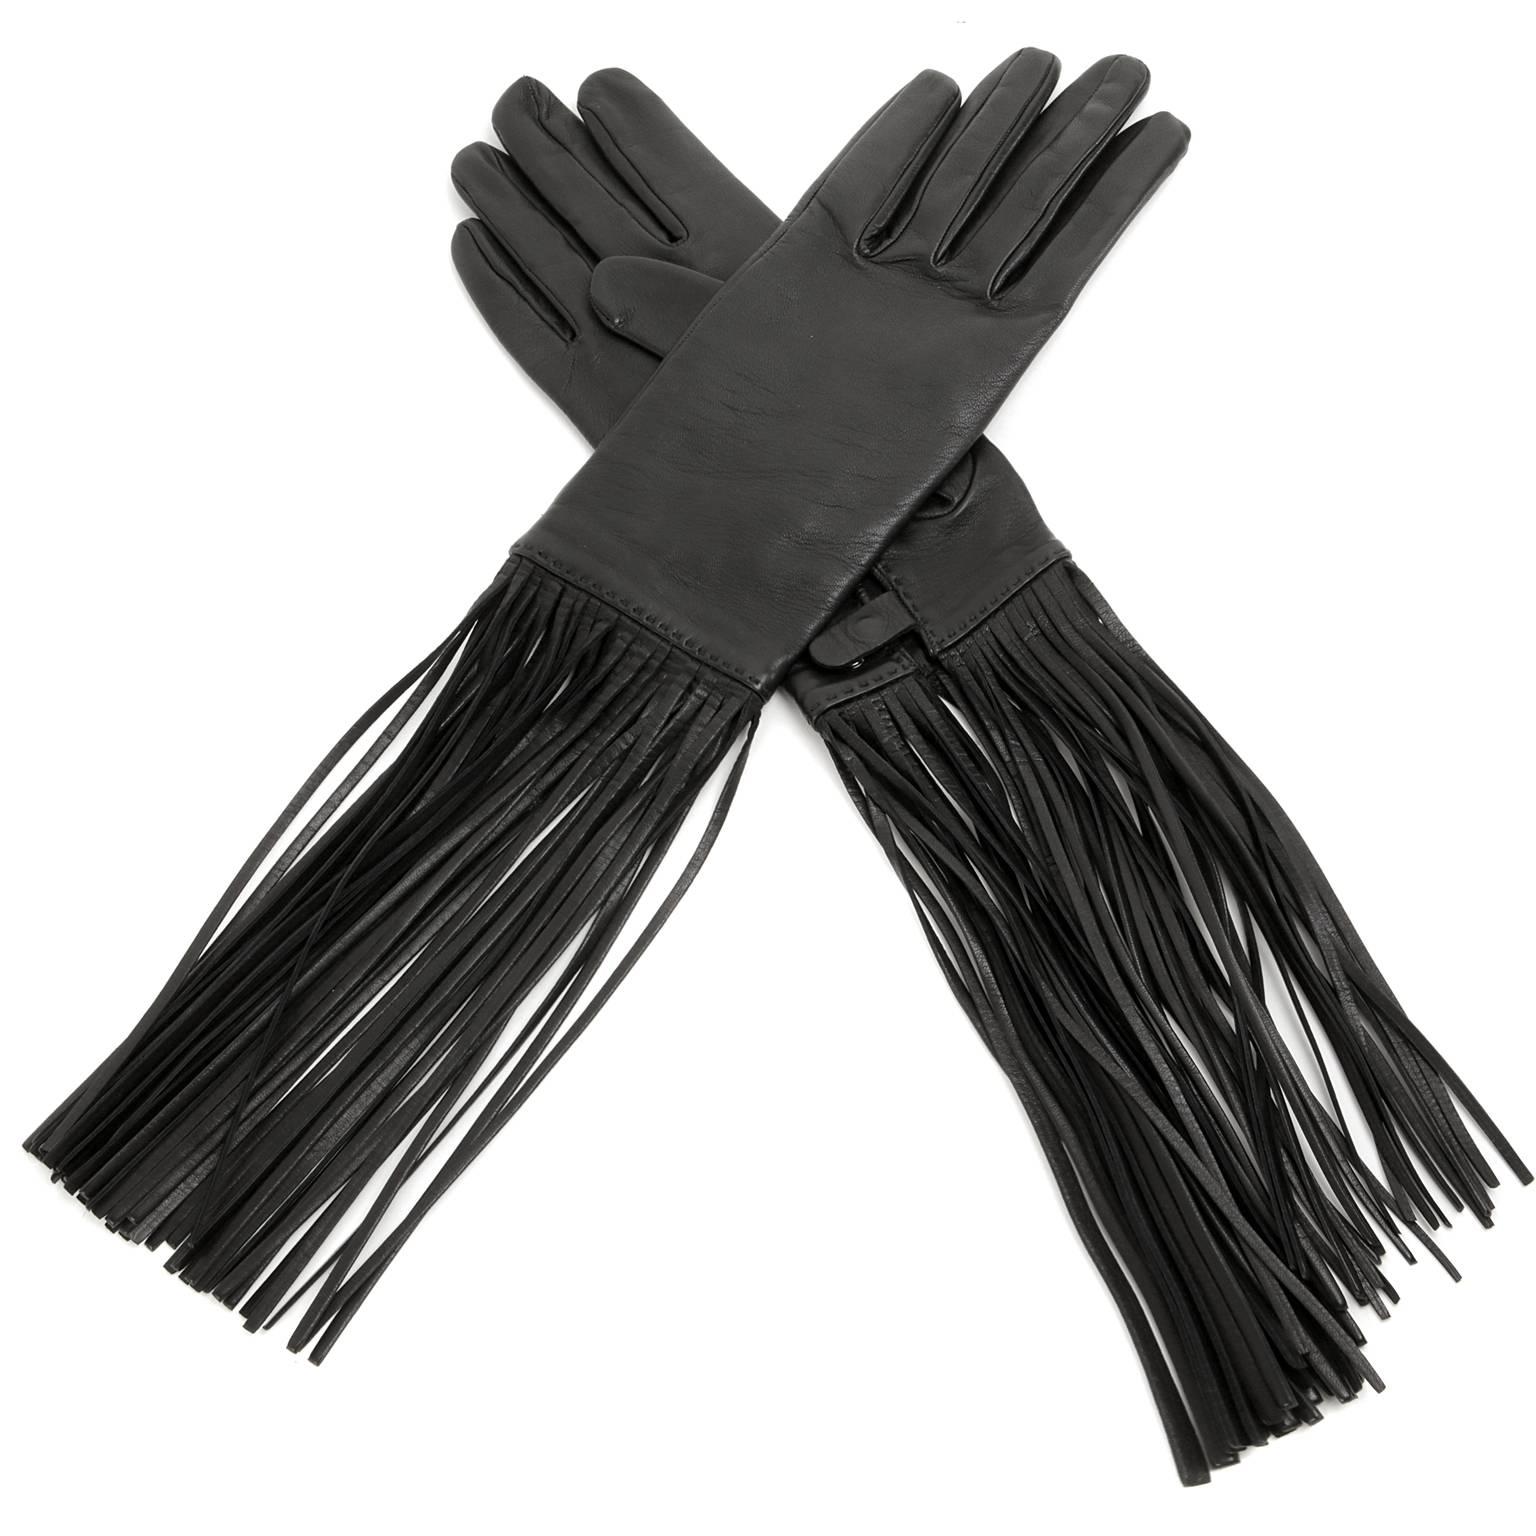 Hermès Black Lambskin Fringed Gloves- PRISTINE
Extraordinarily chic, these gloves are certain to enhance jackets, coats and sweaters with major wow factor. 
 
Beautifully soft black lambskin gloves have extra-long leather fringe surrounding the